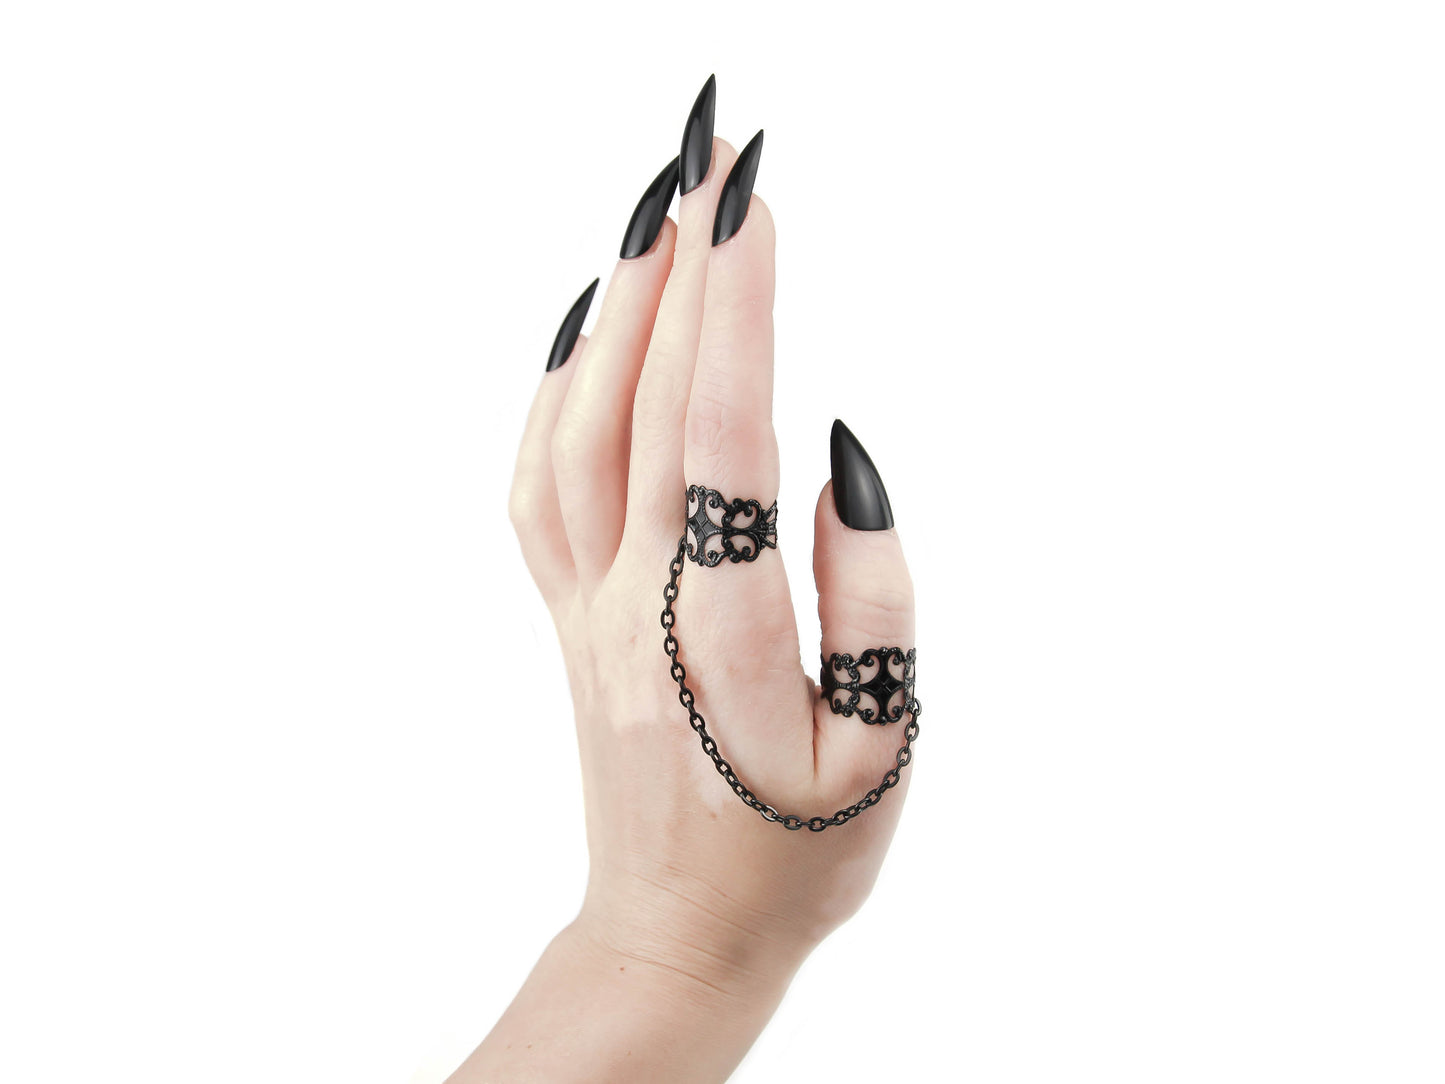 A hand with sleek black nails presents Myril Jewels' ornate black rings, connected by a fine chain, embodying the dark-avantgarde spirit. Perfect for gothic-chic, punk, or whimsigoth aesthetics, these rings are a must-have for any alternative style, especially during Halloween and neo-gothic events.